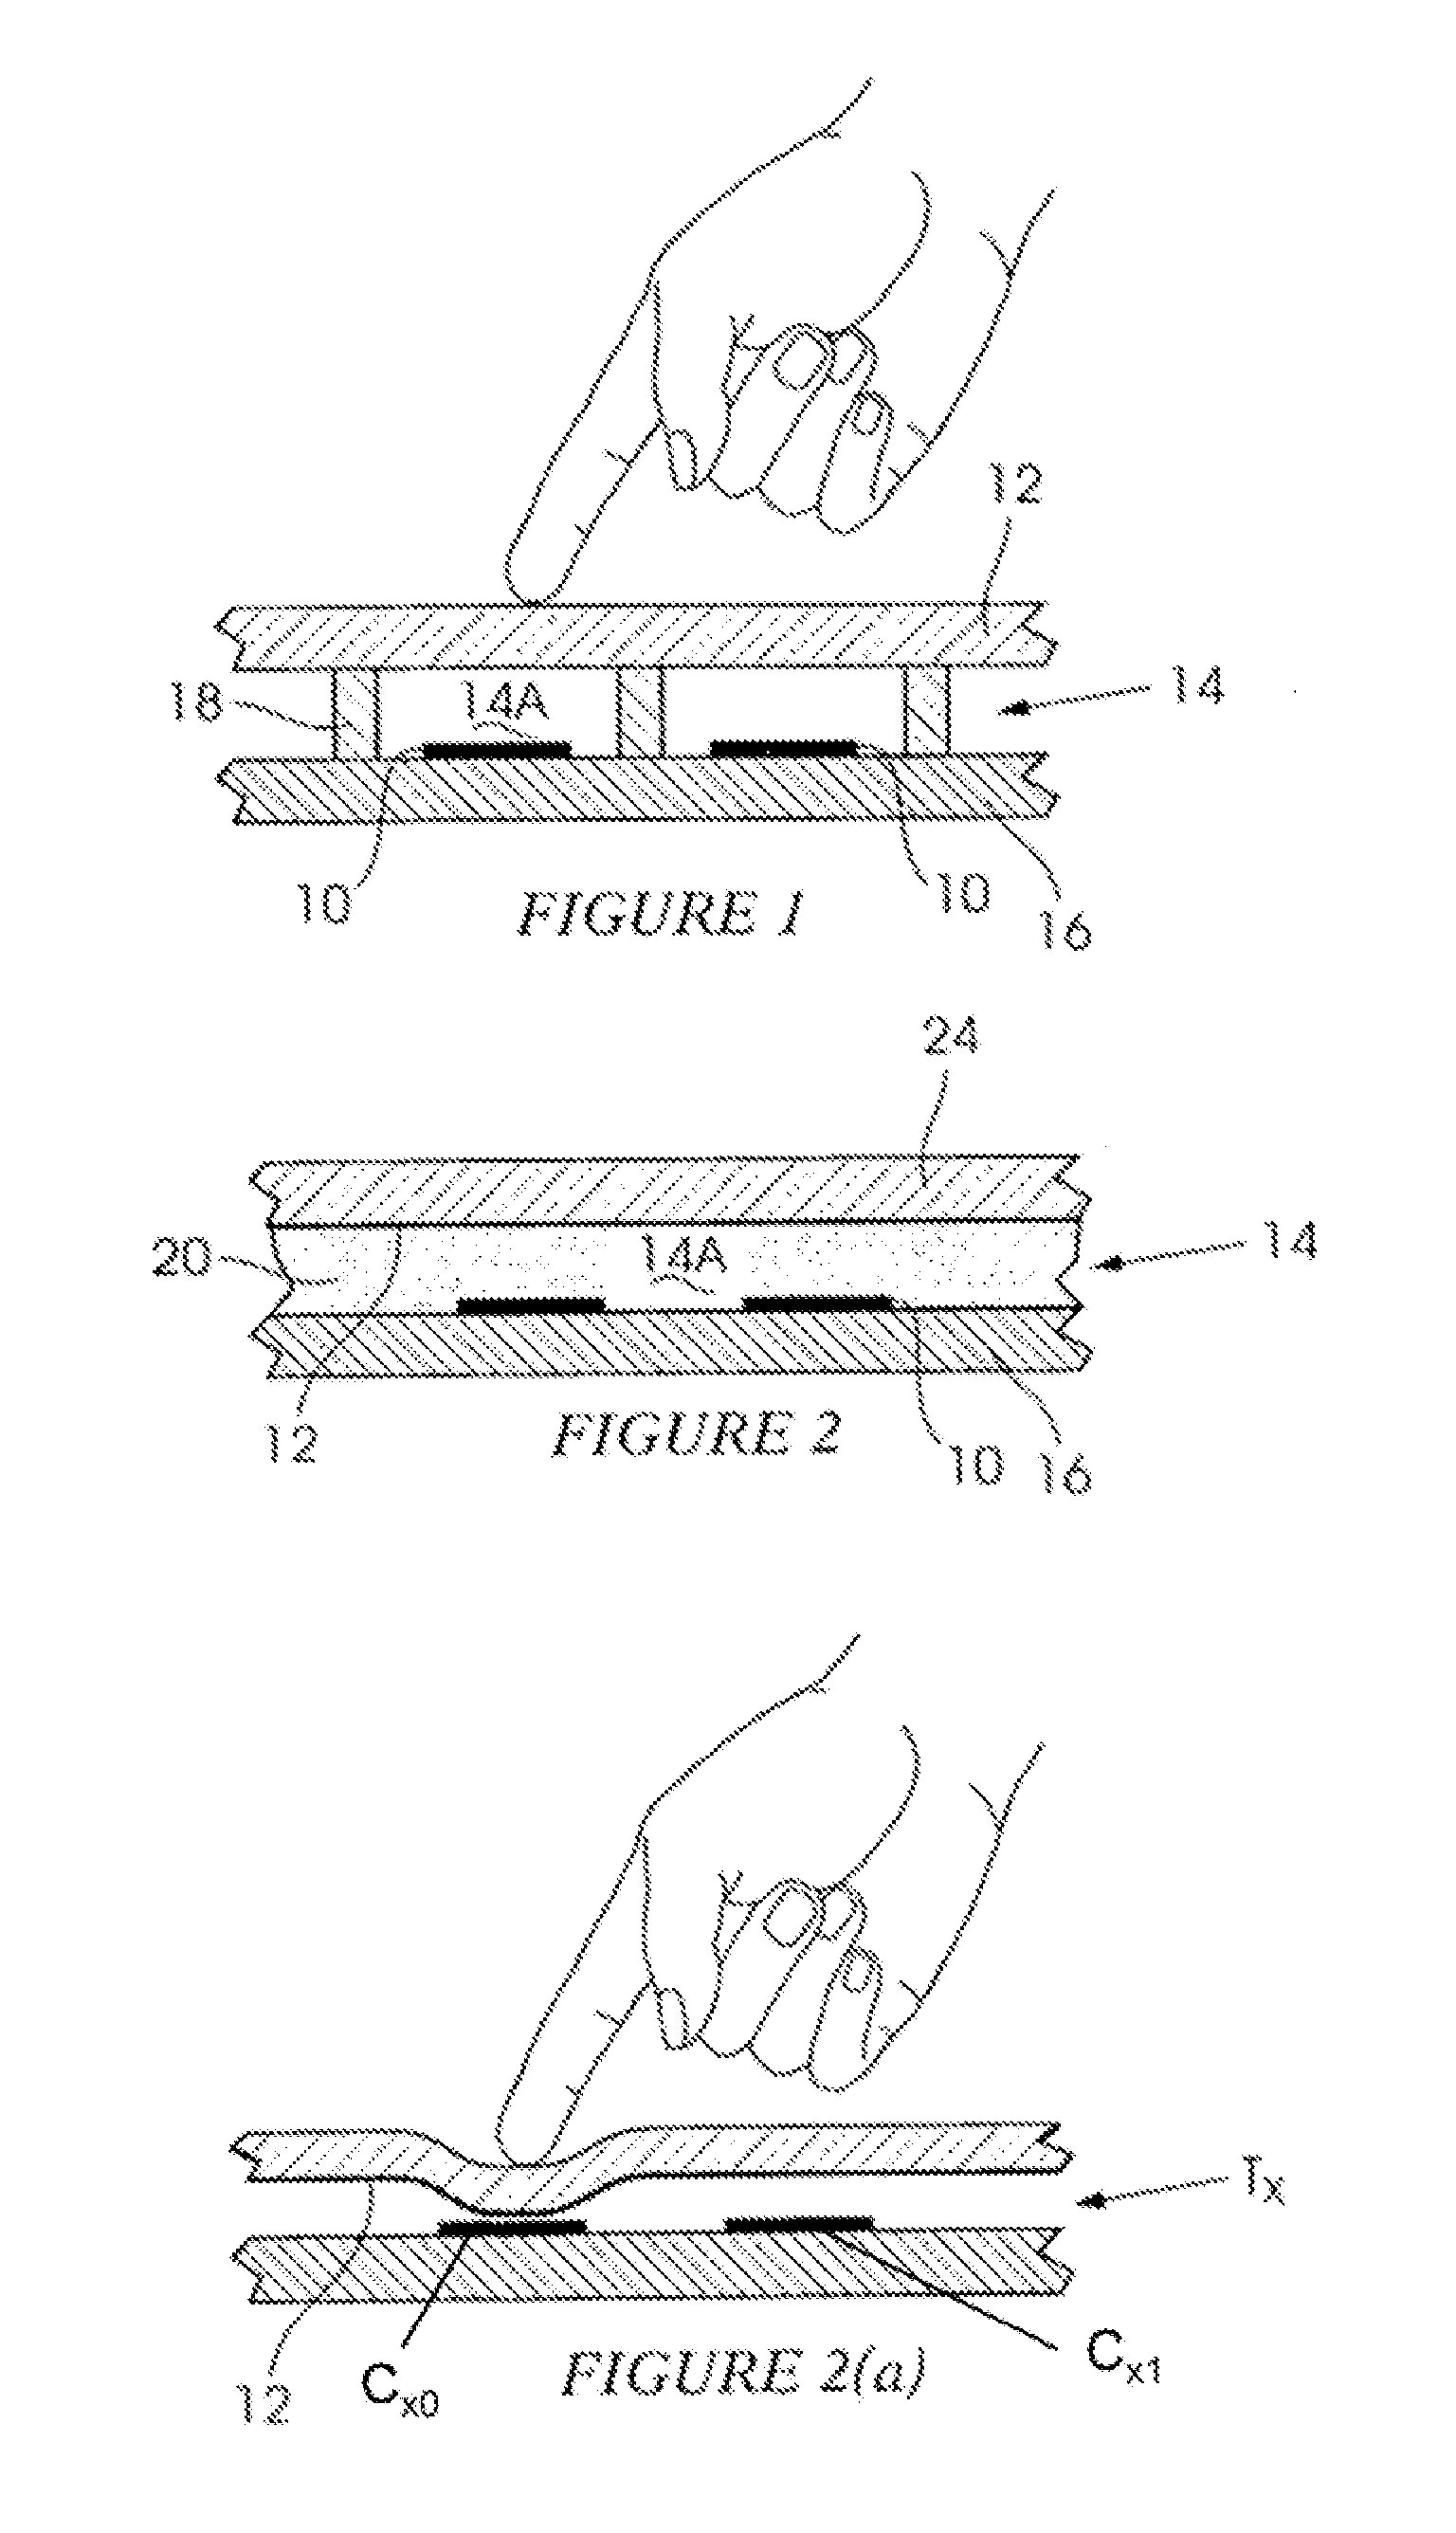 Pressure dependent capacitive sensing circuit switch construction